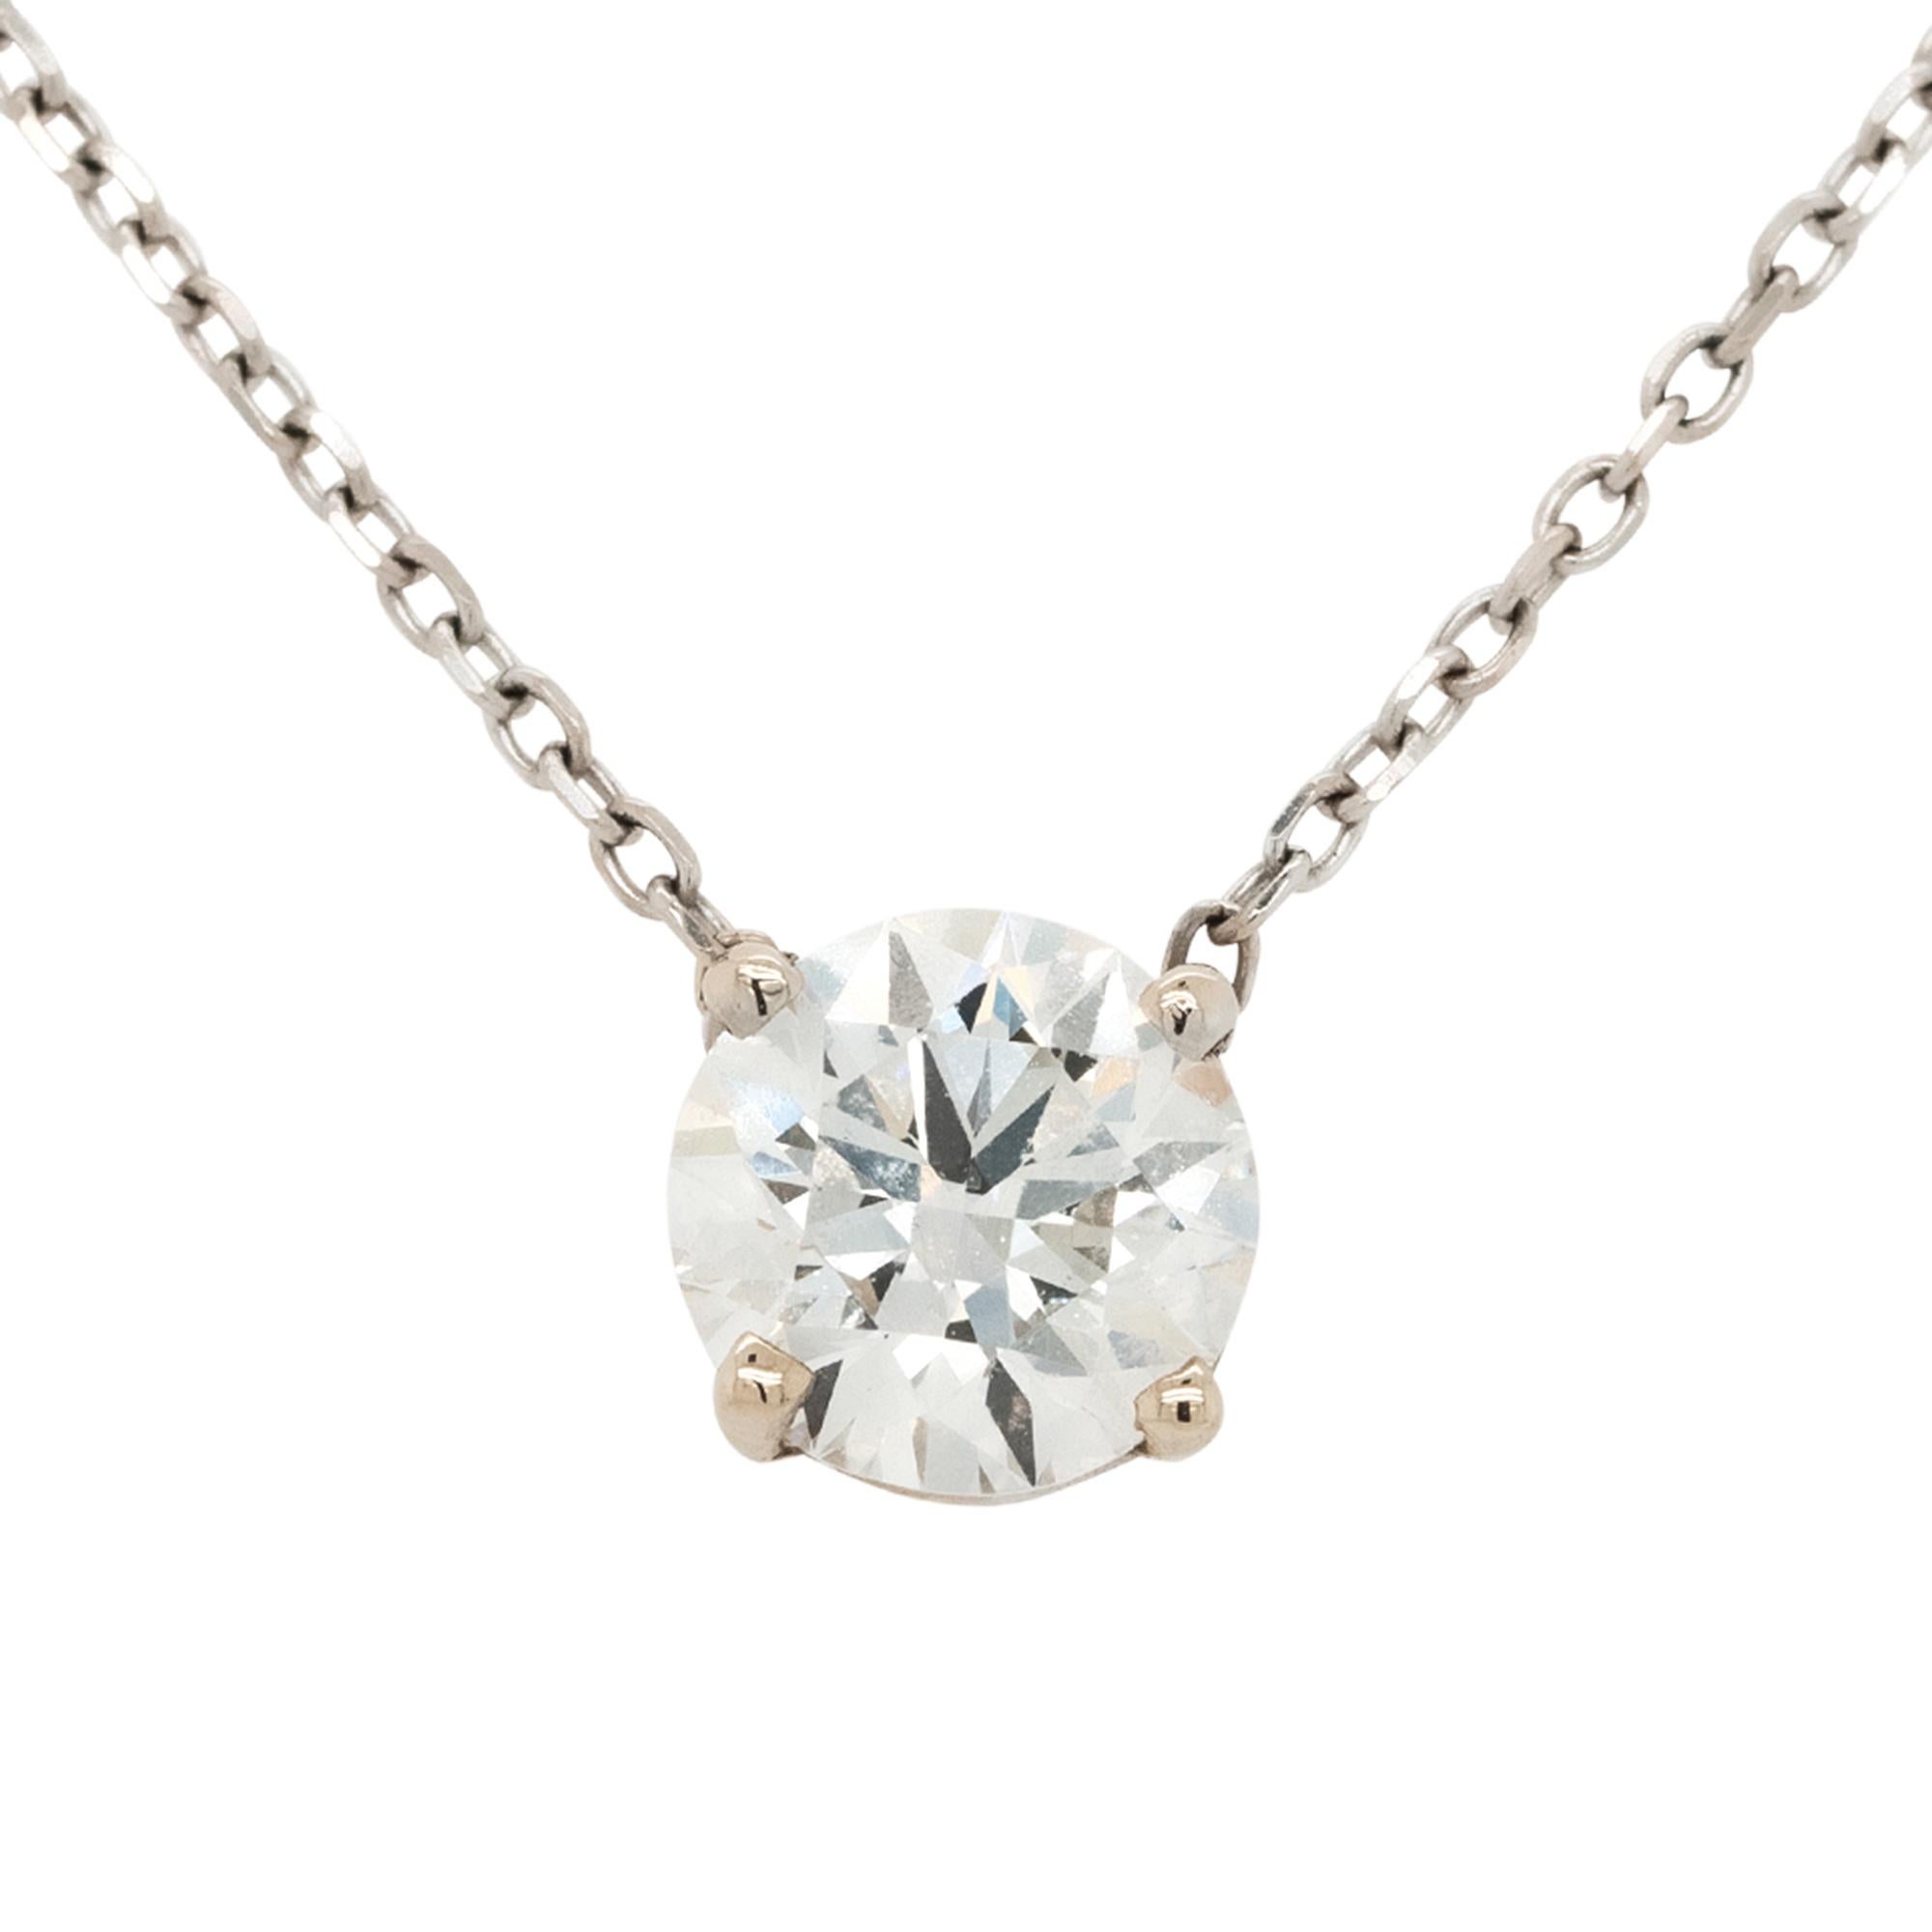 Material: 14k white gold
Diamond Details: 0.90ctw of Brilliant Round Cut Diamond. Diamond is G/H in color and VS in clarity. SI1 GIA# 1363714574
Measurements: Necklace is 16